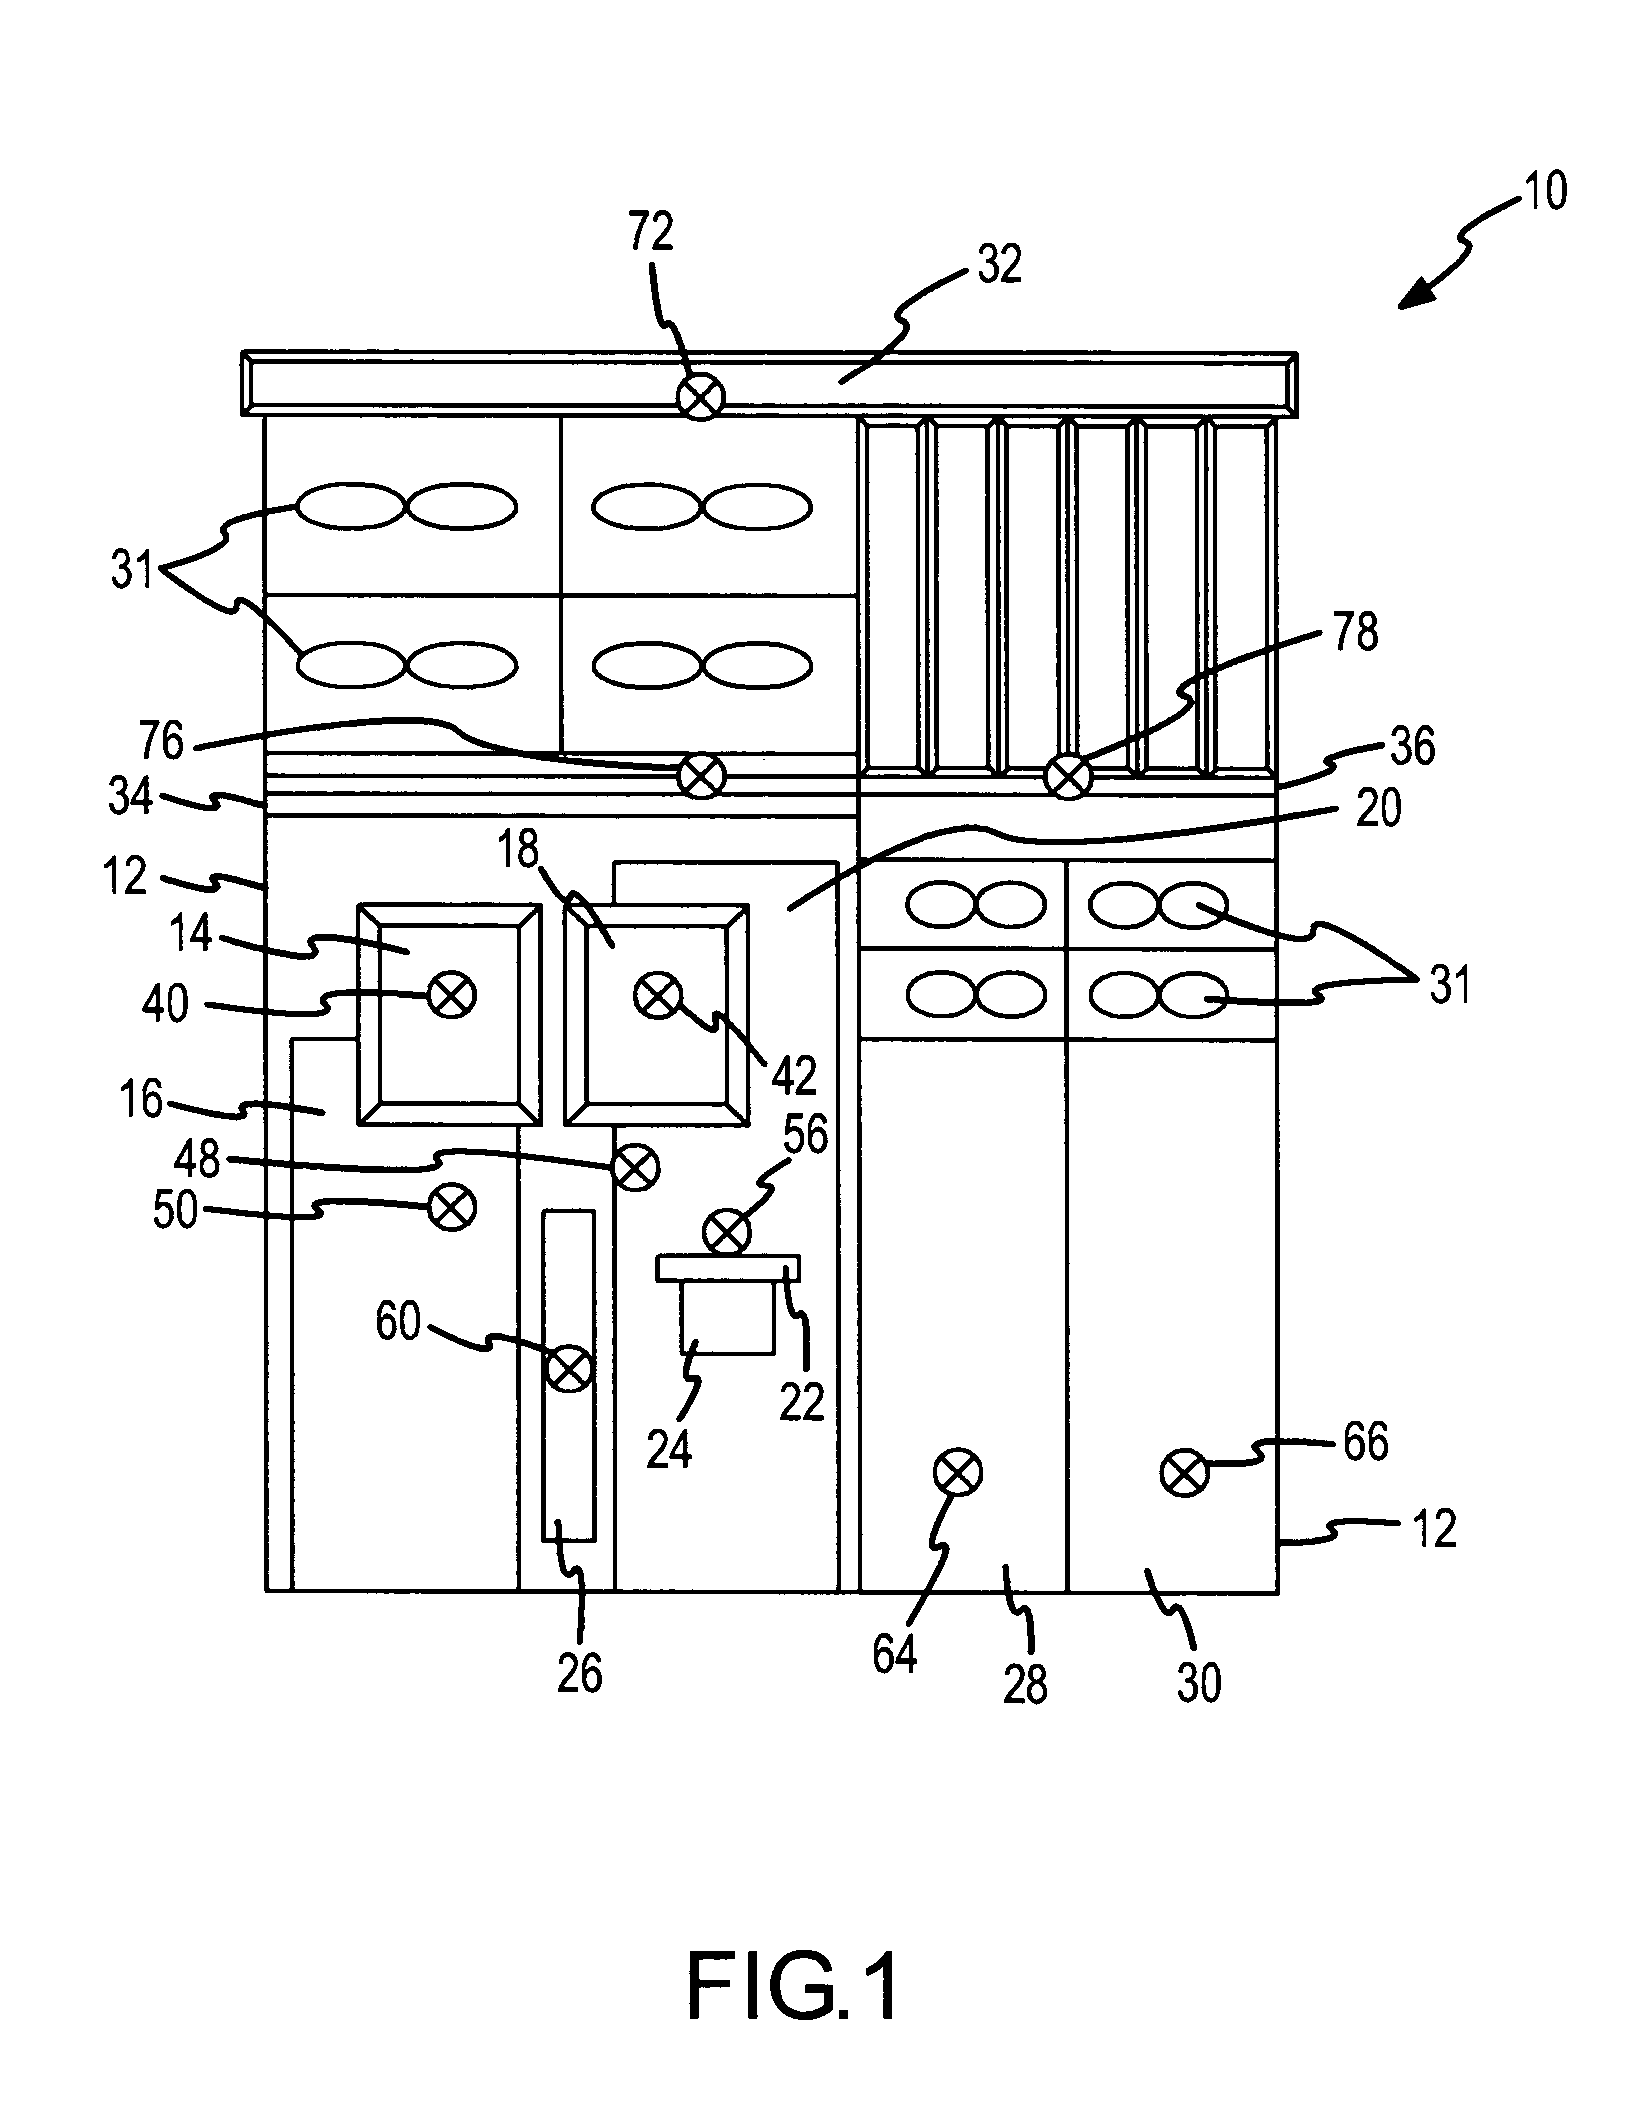 Thermal monitoring and response apparatus and method for computer unit